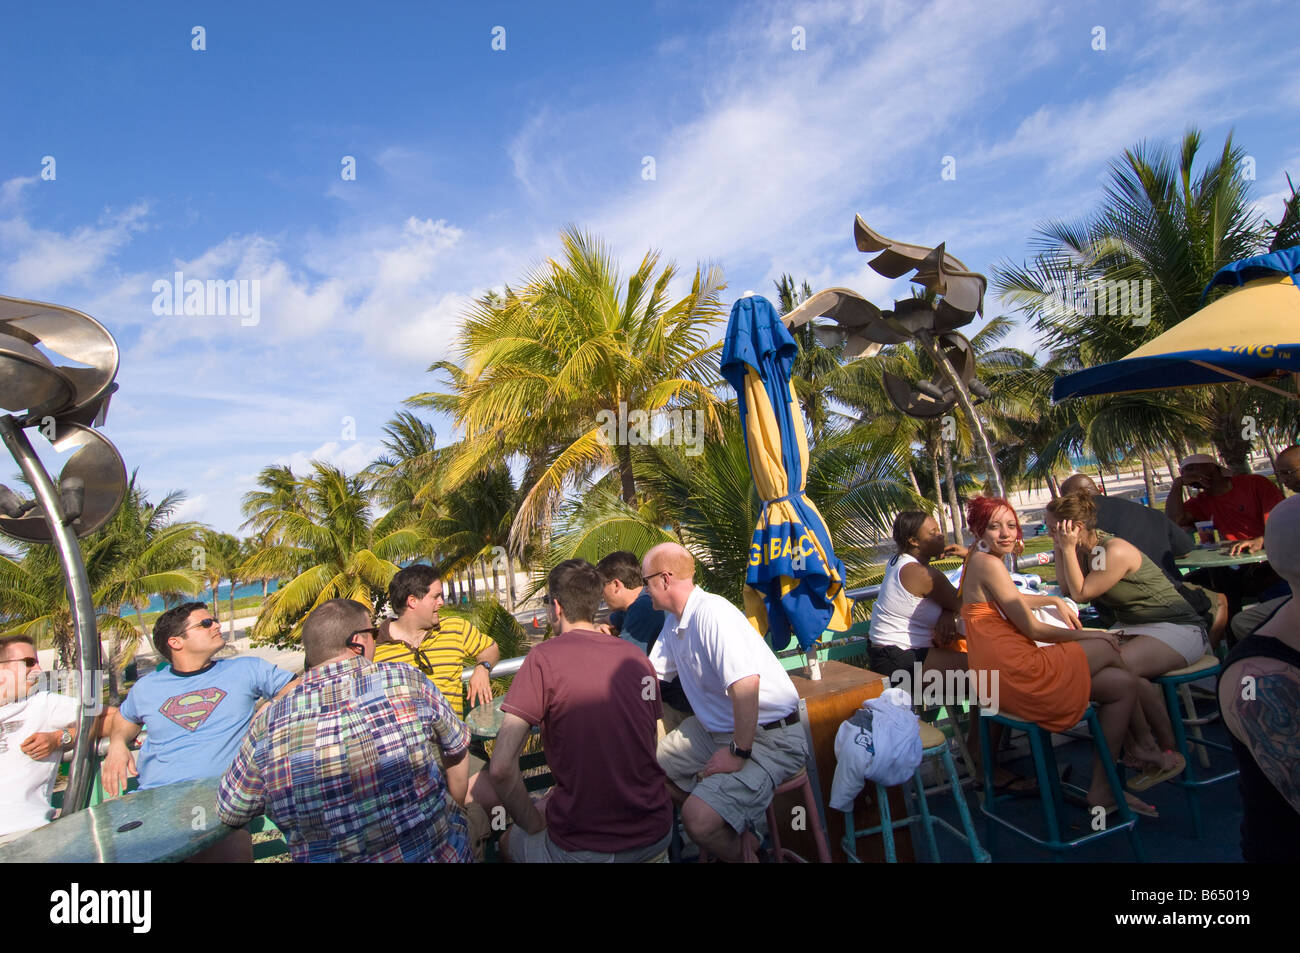 Miami Beach Florida,Miami Music Week,pool party,crowd,standing,dancing,drink  drinks beverage beverages drinking,young adult,men,women,stage,lighting,t  Stock Photo - Alamy